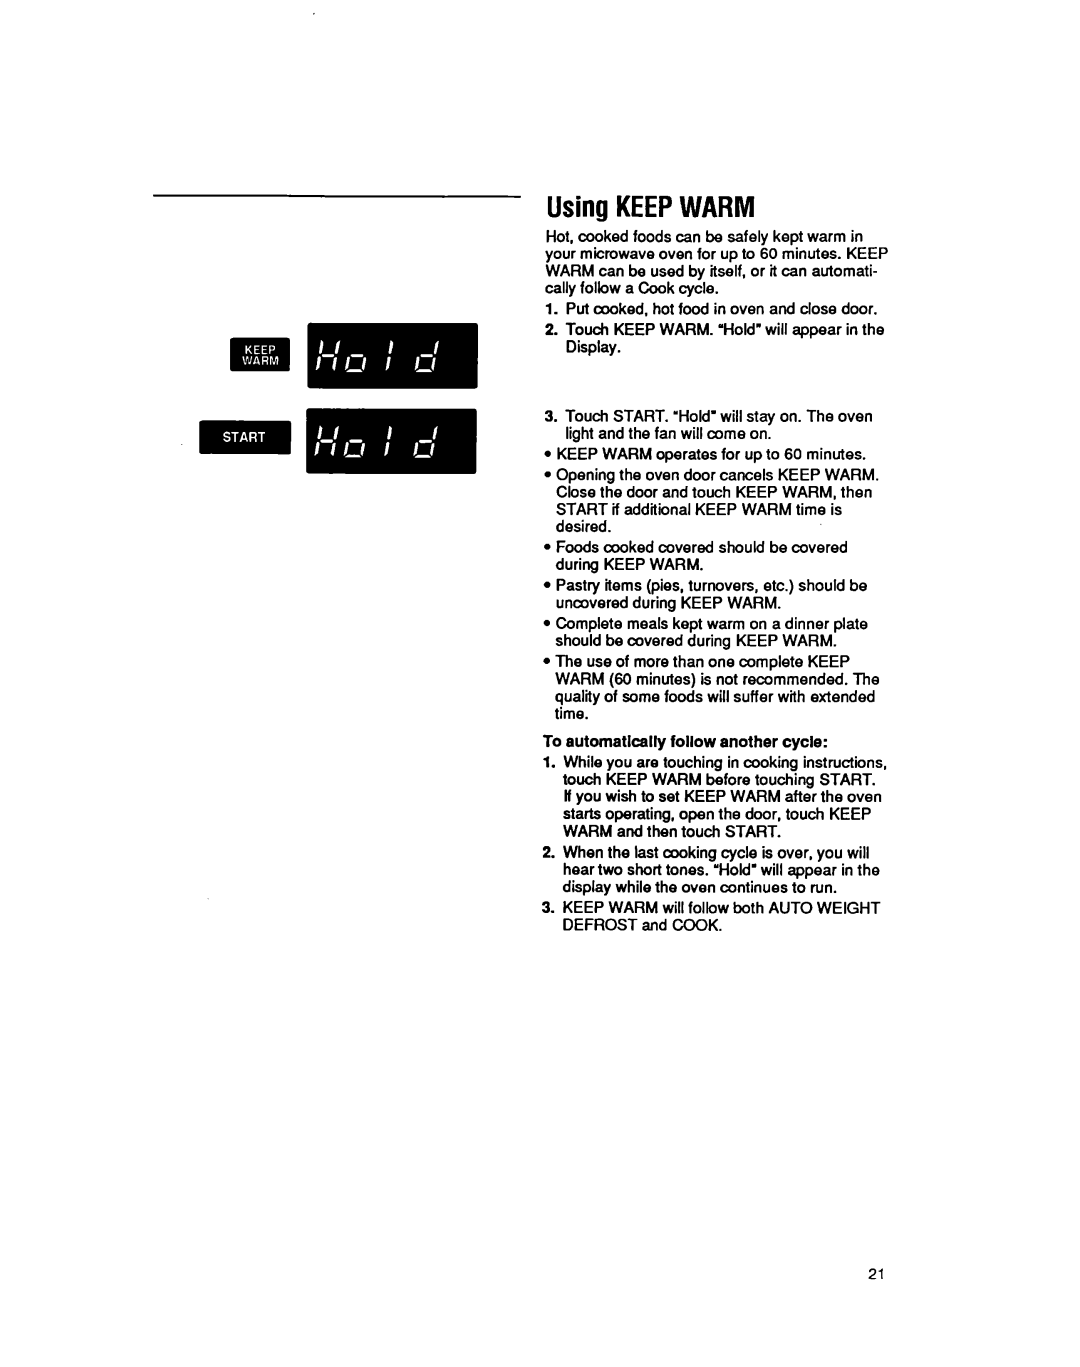 Whirlpool MS3080XY user manual UsingKEEPWARM, To automatkelly follow another cycle 